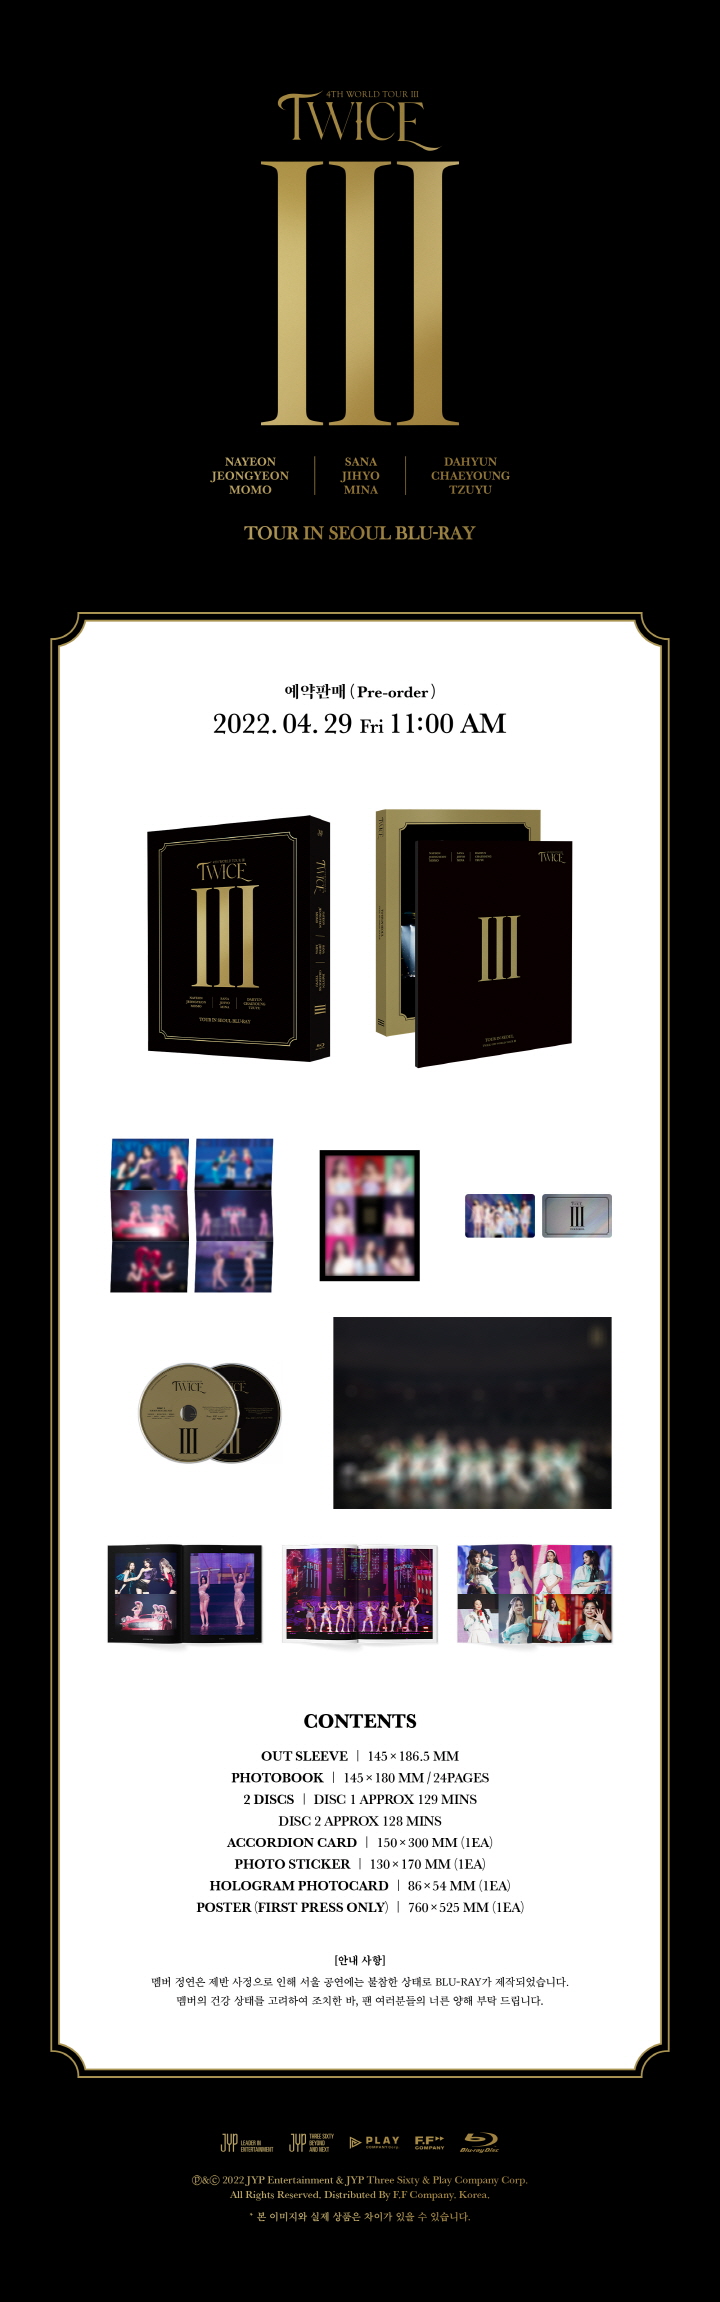 TWICE  4TH WORLD TOUR  Ⅲ  IN SEOUL DVD  and  Poster